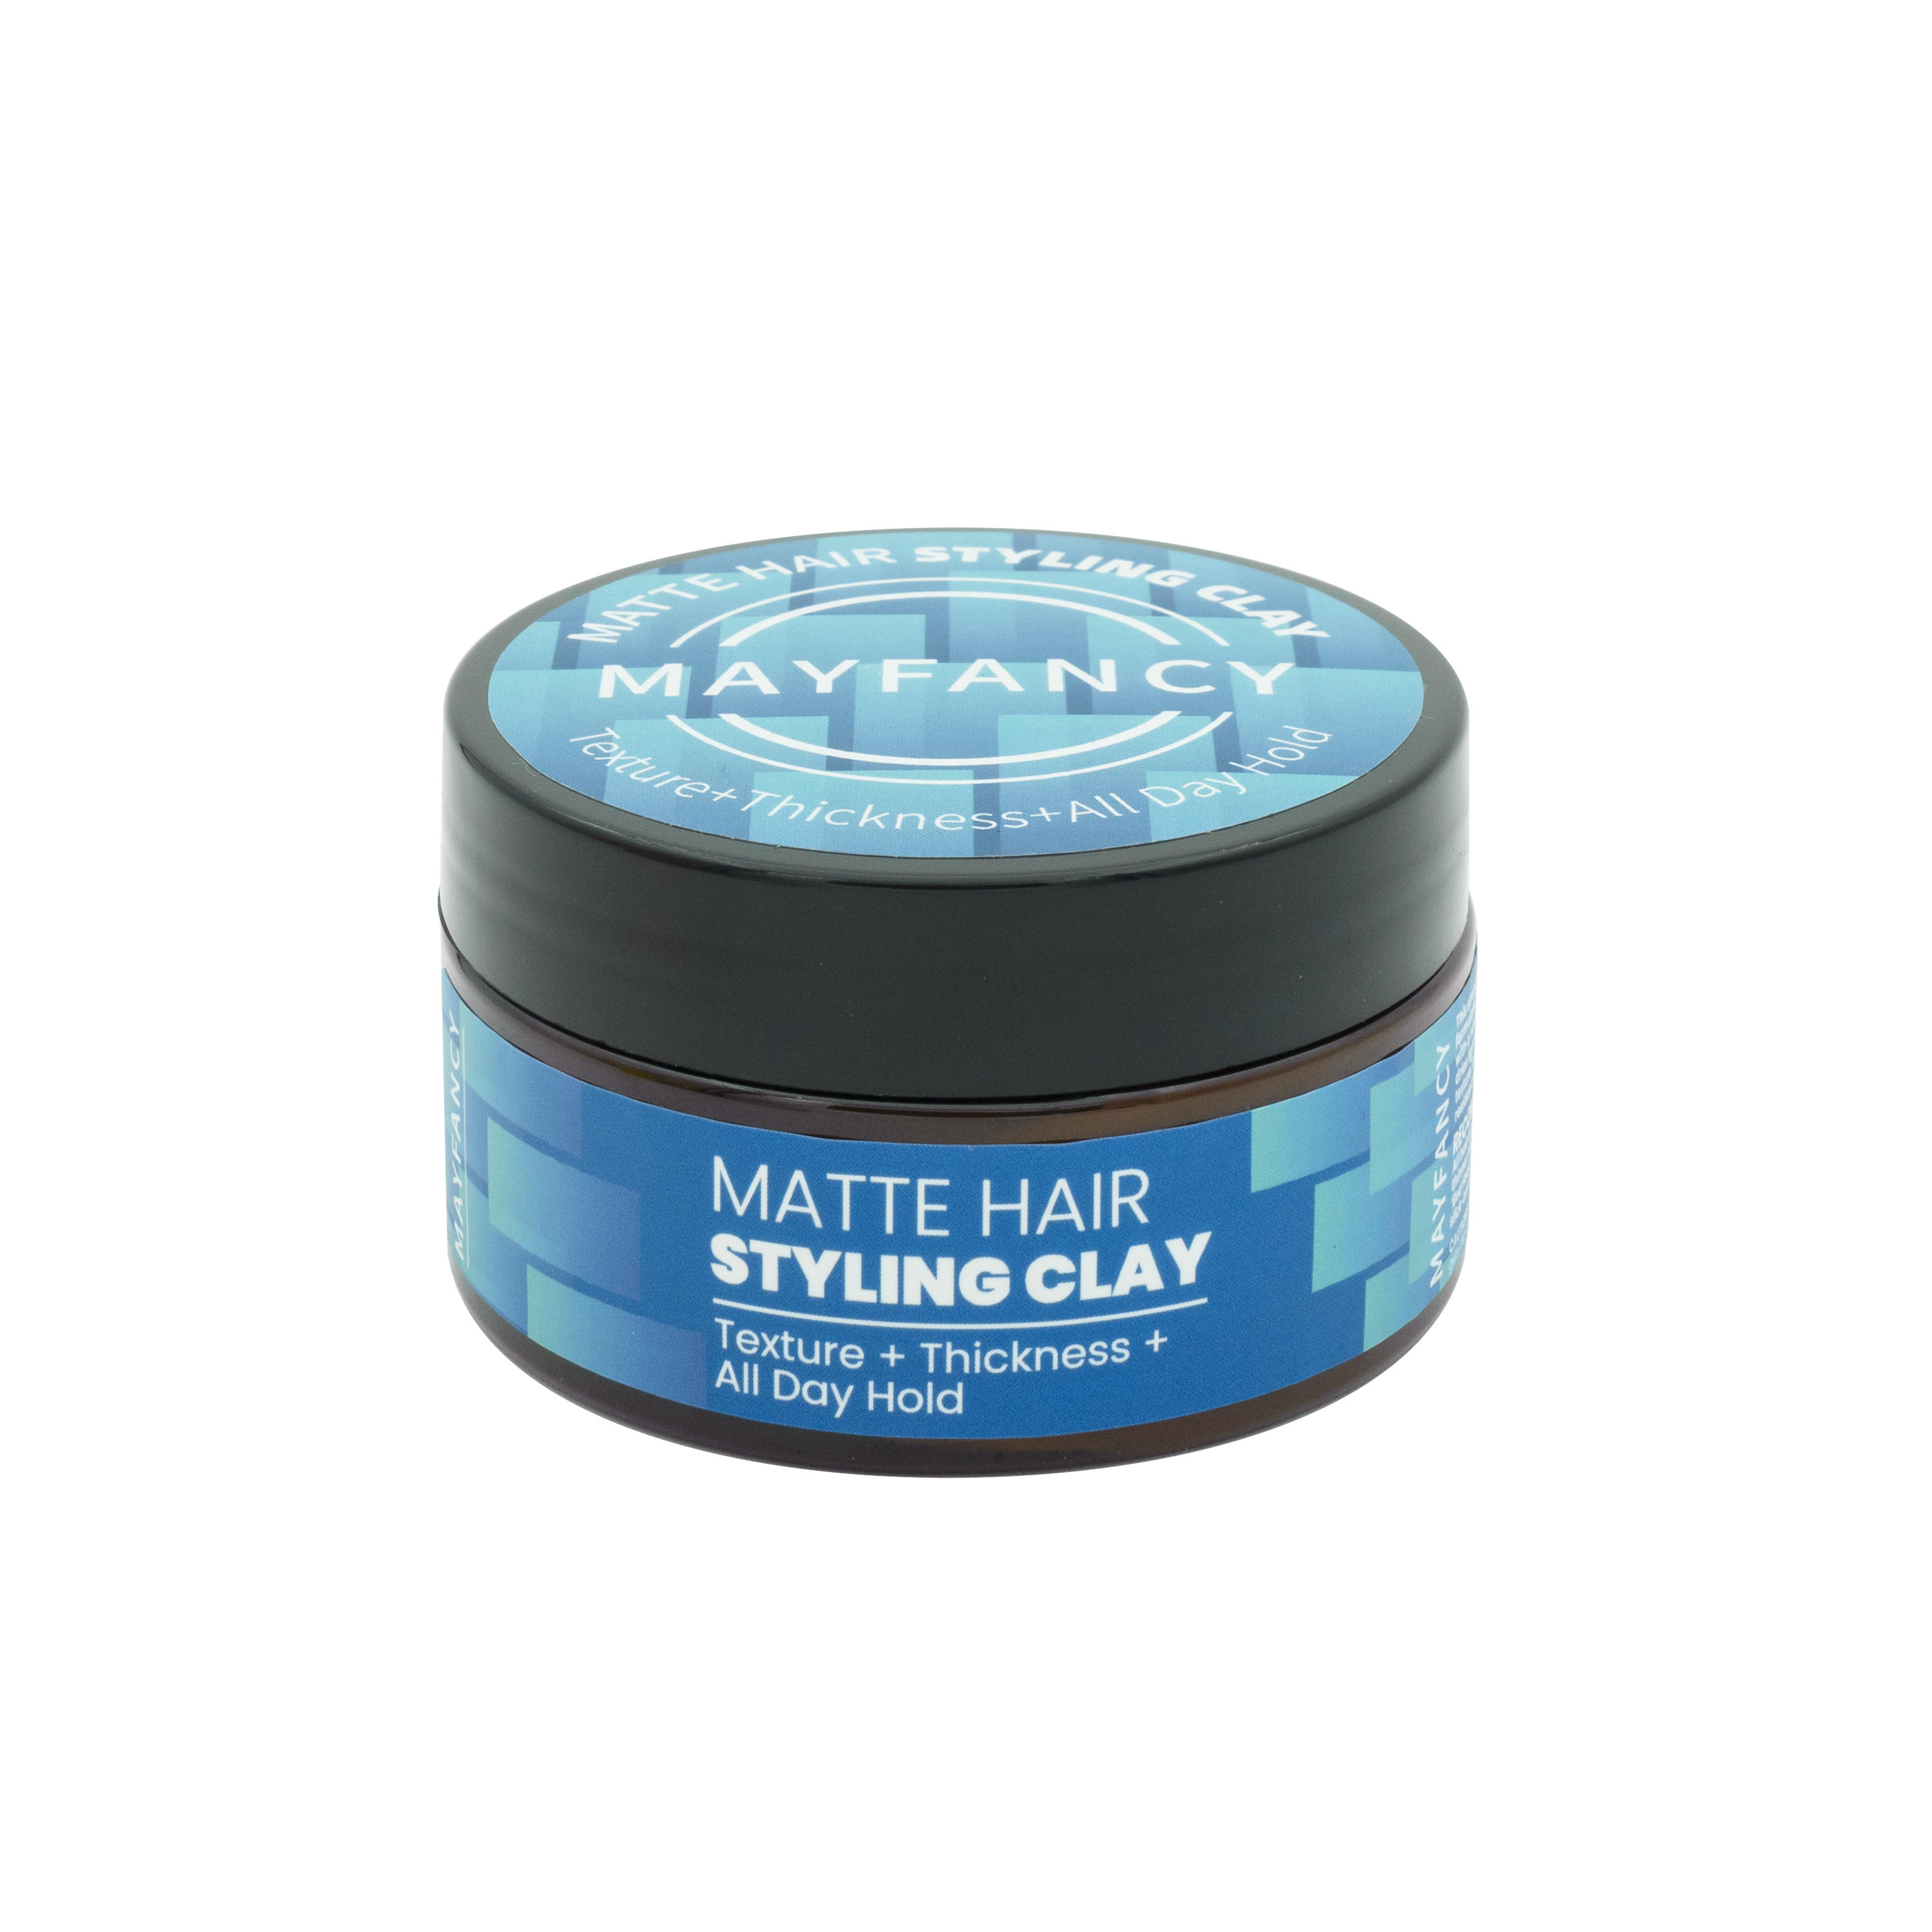 Mayfancy Matte Hair Styling Clay